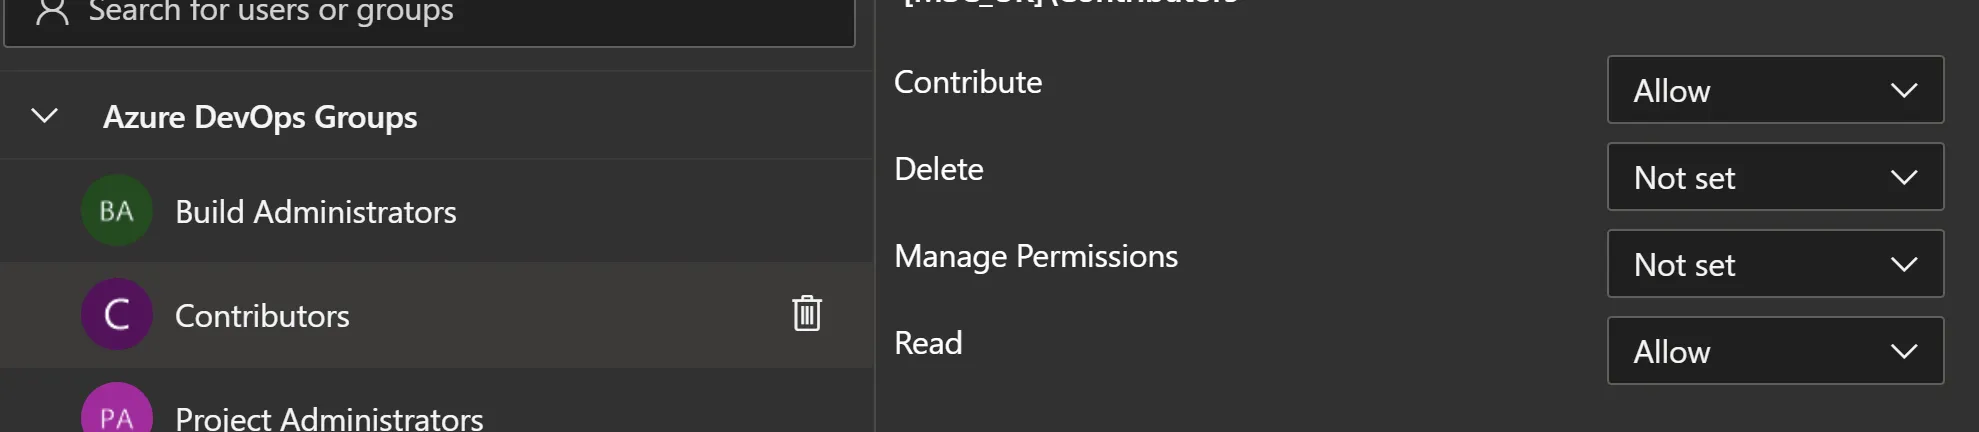 Manage permissions by group